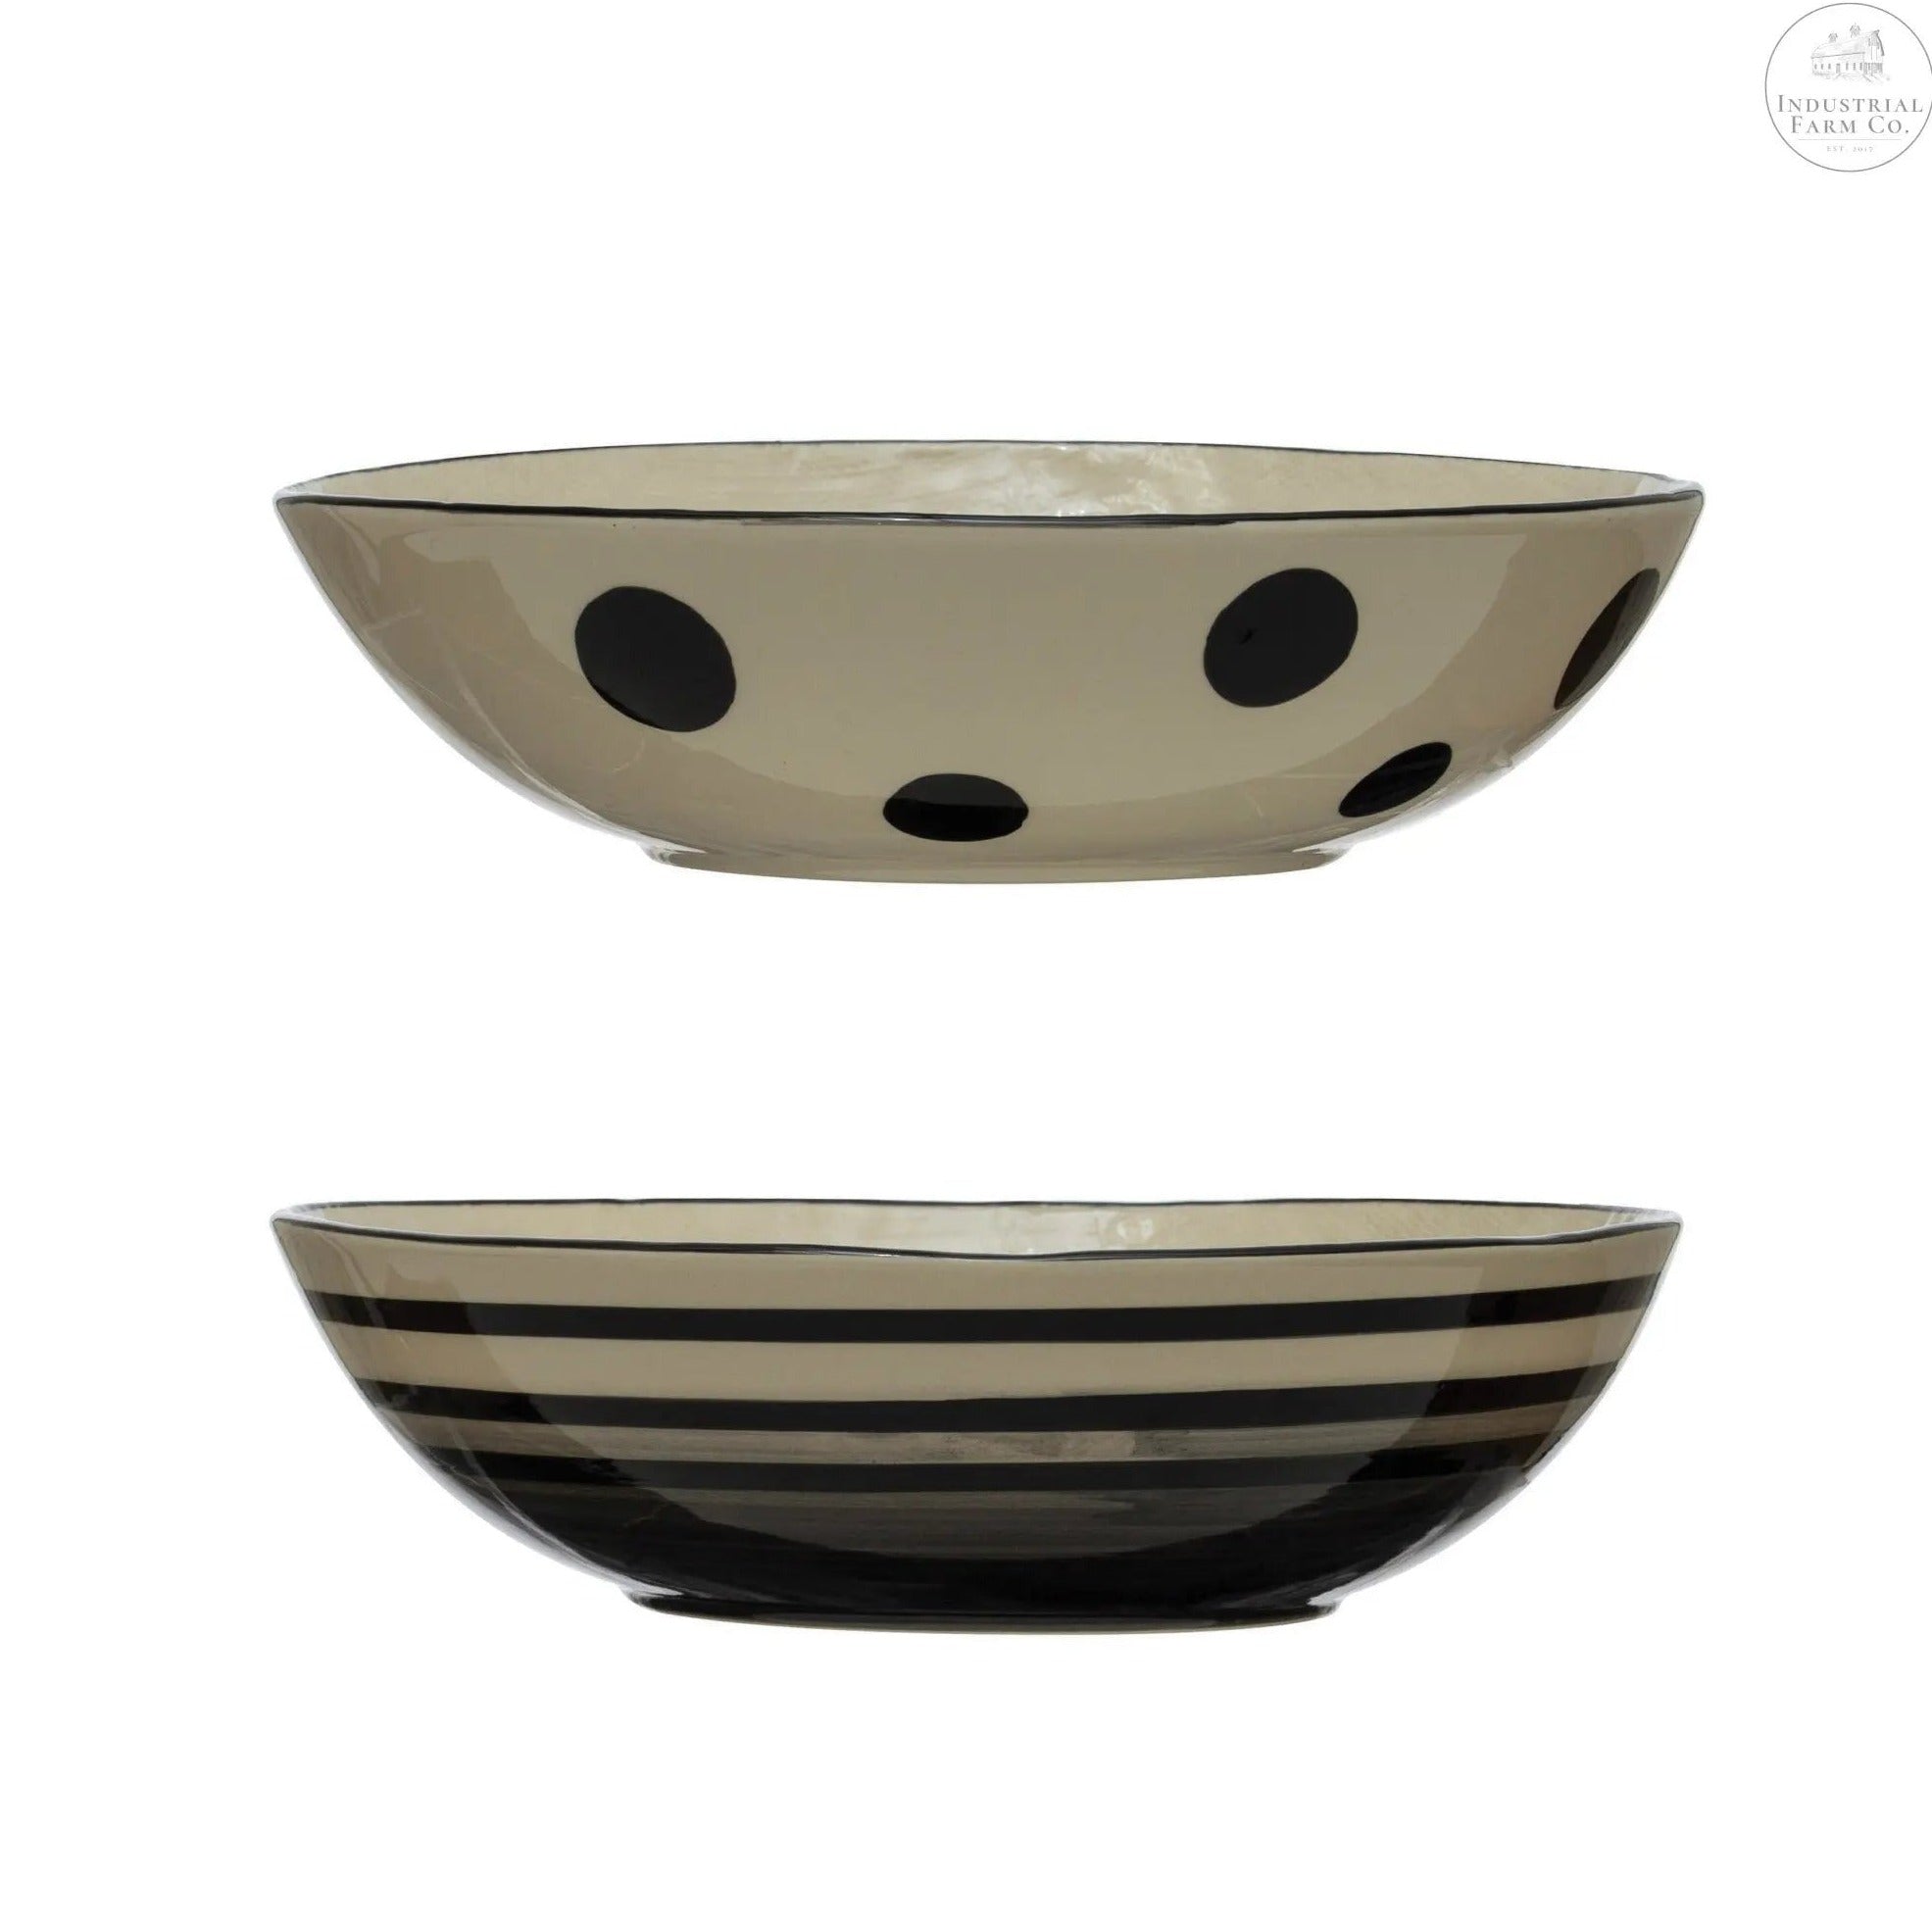 The Walker Hand Painted Serving Bowl  Dots   | Industrial Farm Co